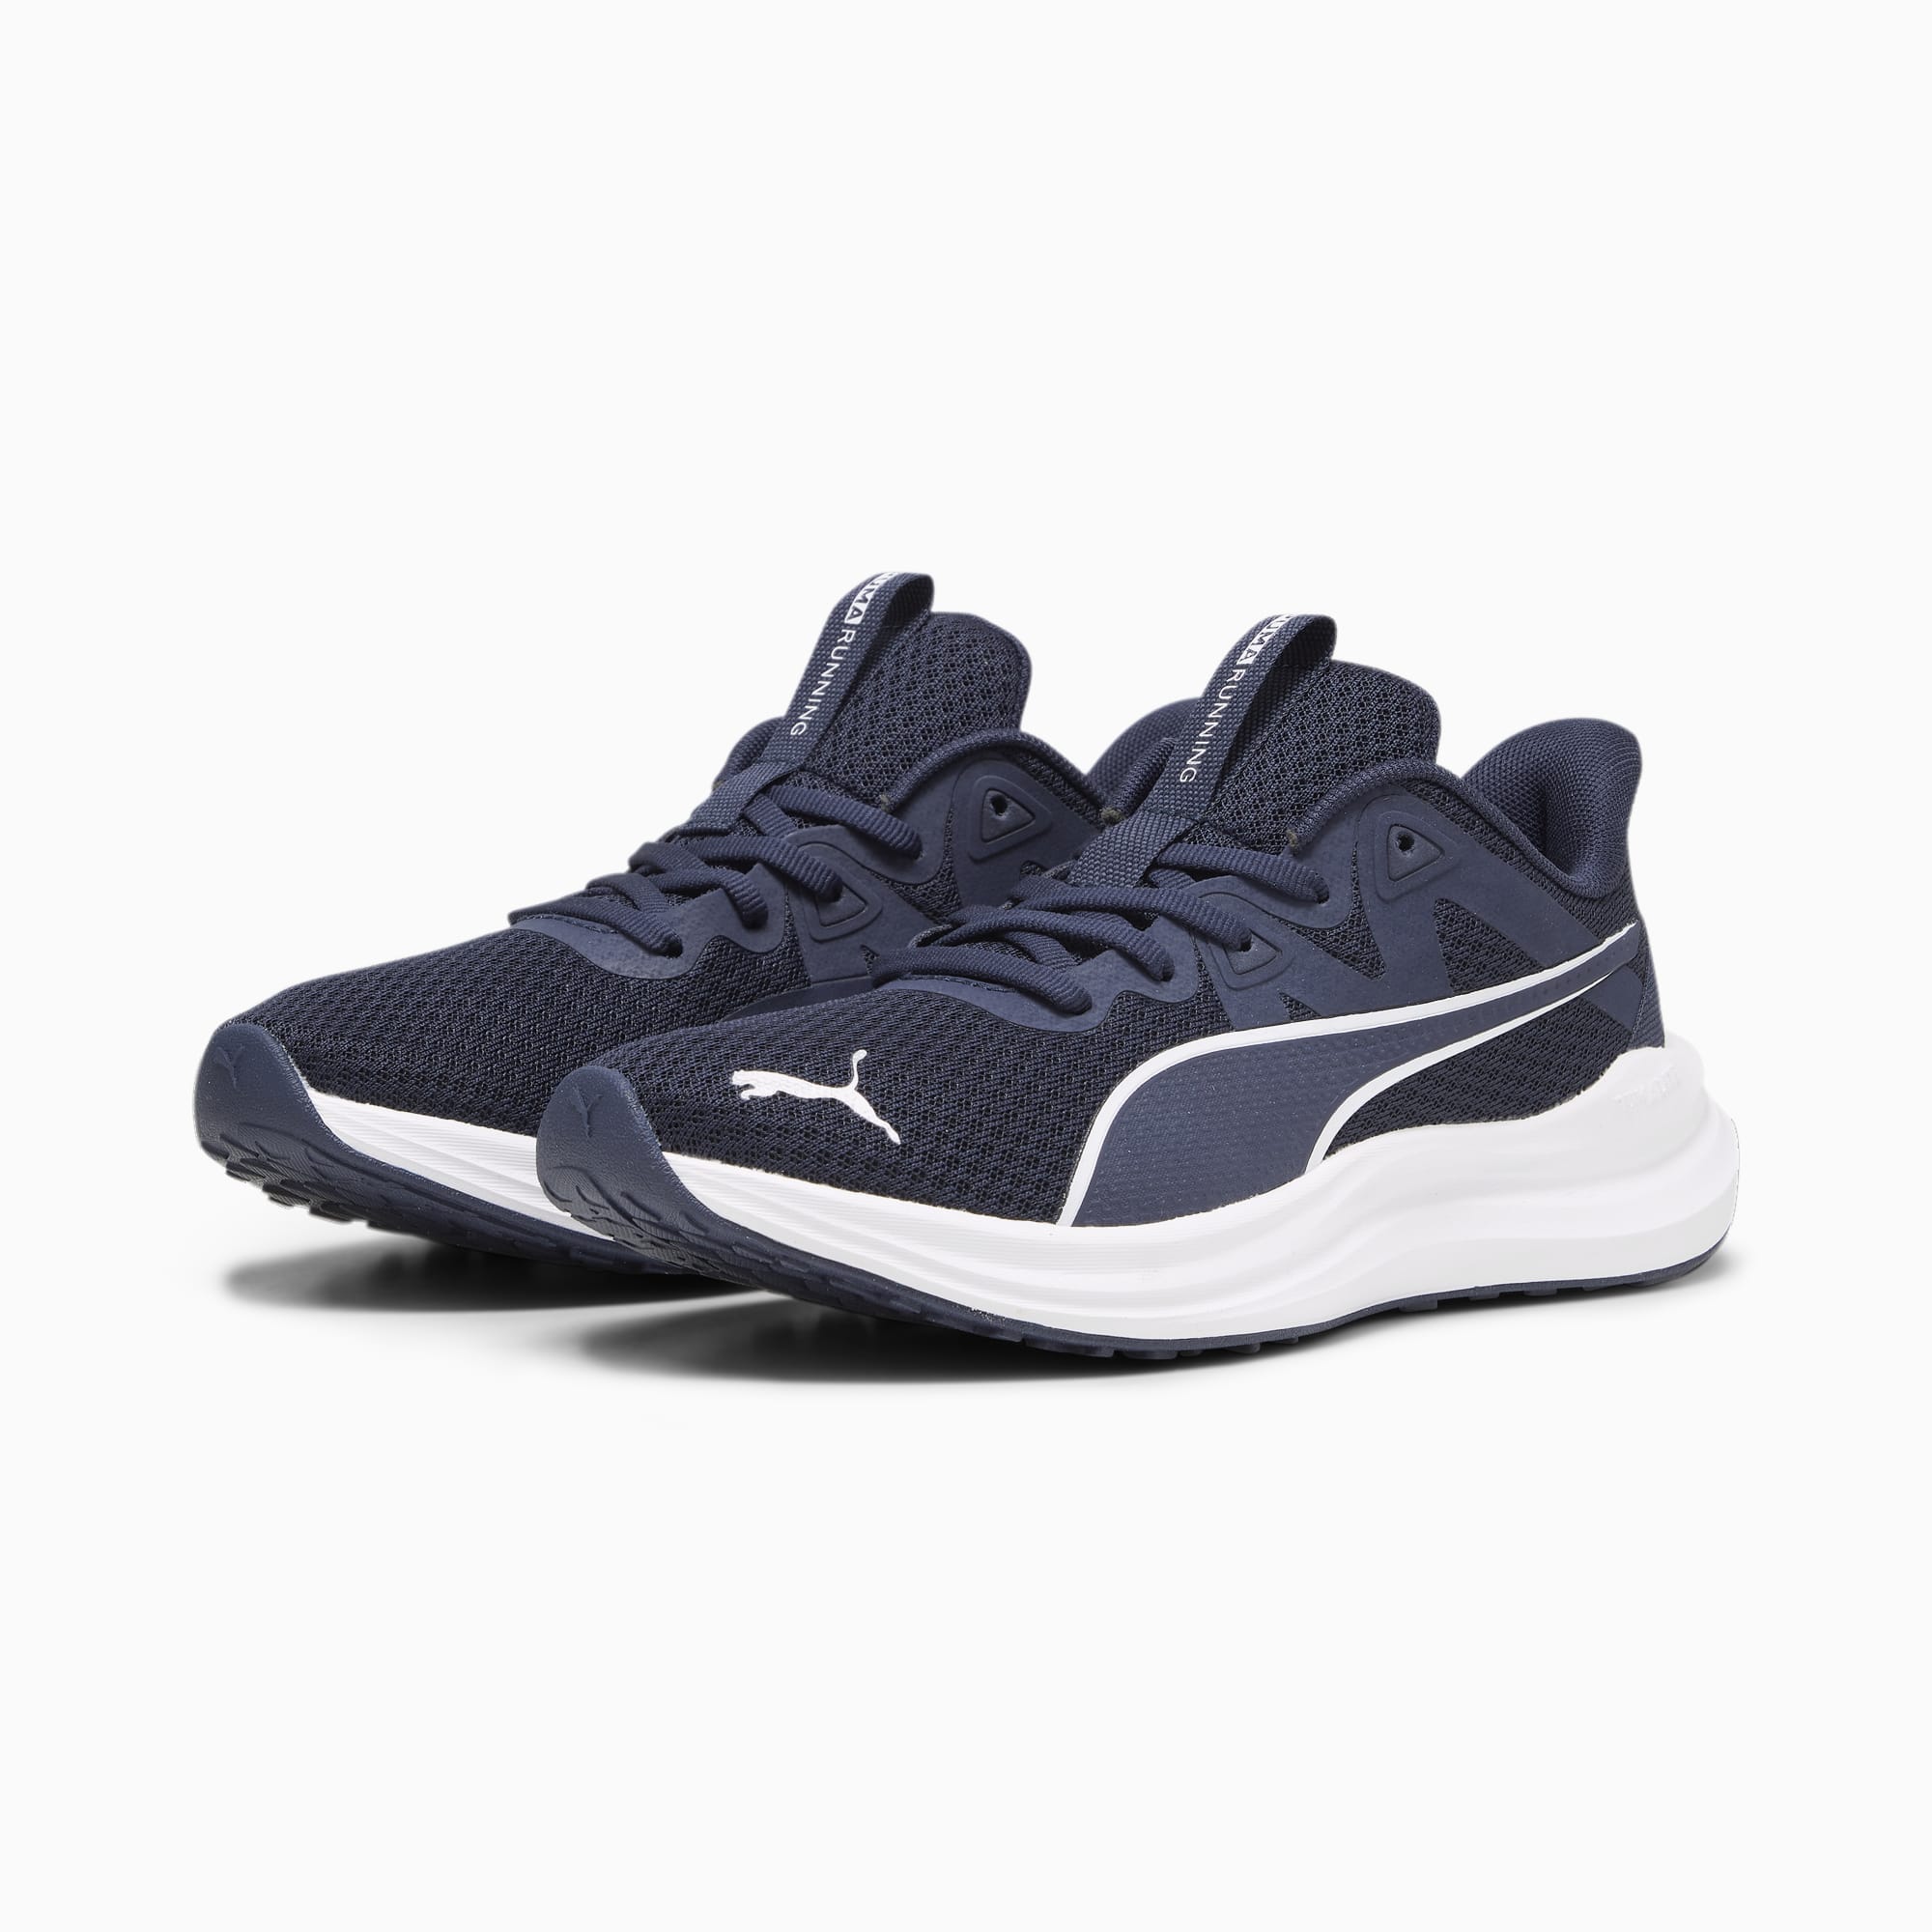 PUMA Reflect Lite Youth Running Shoes, Dark Blue, Size 35,5, Shoes